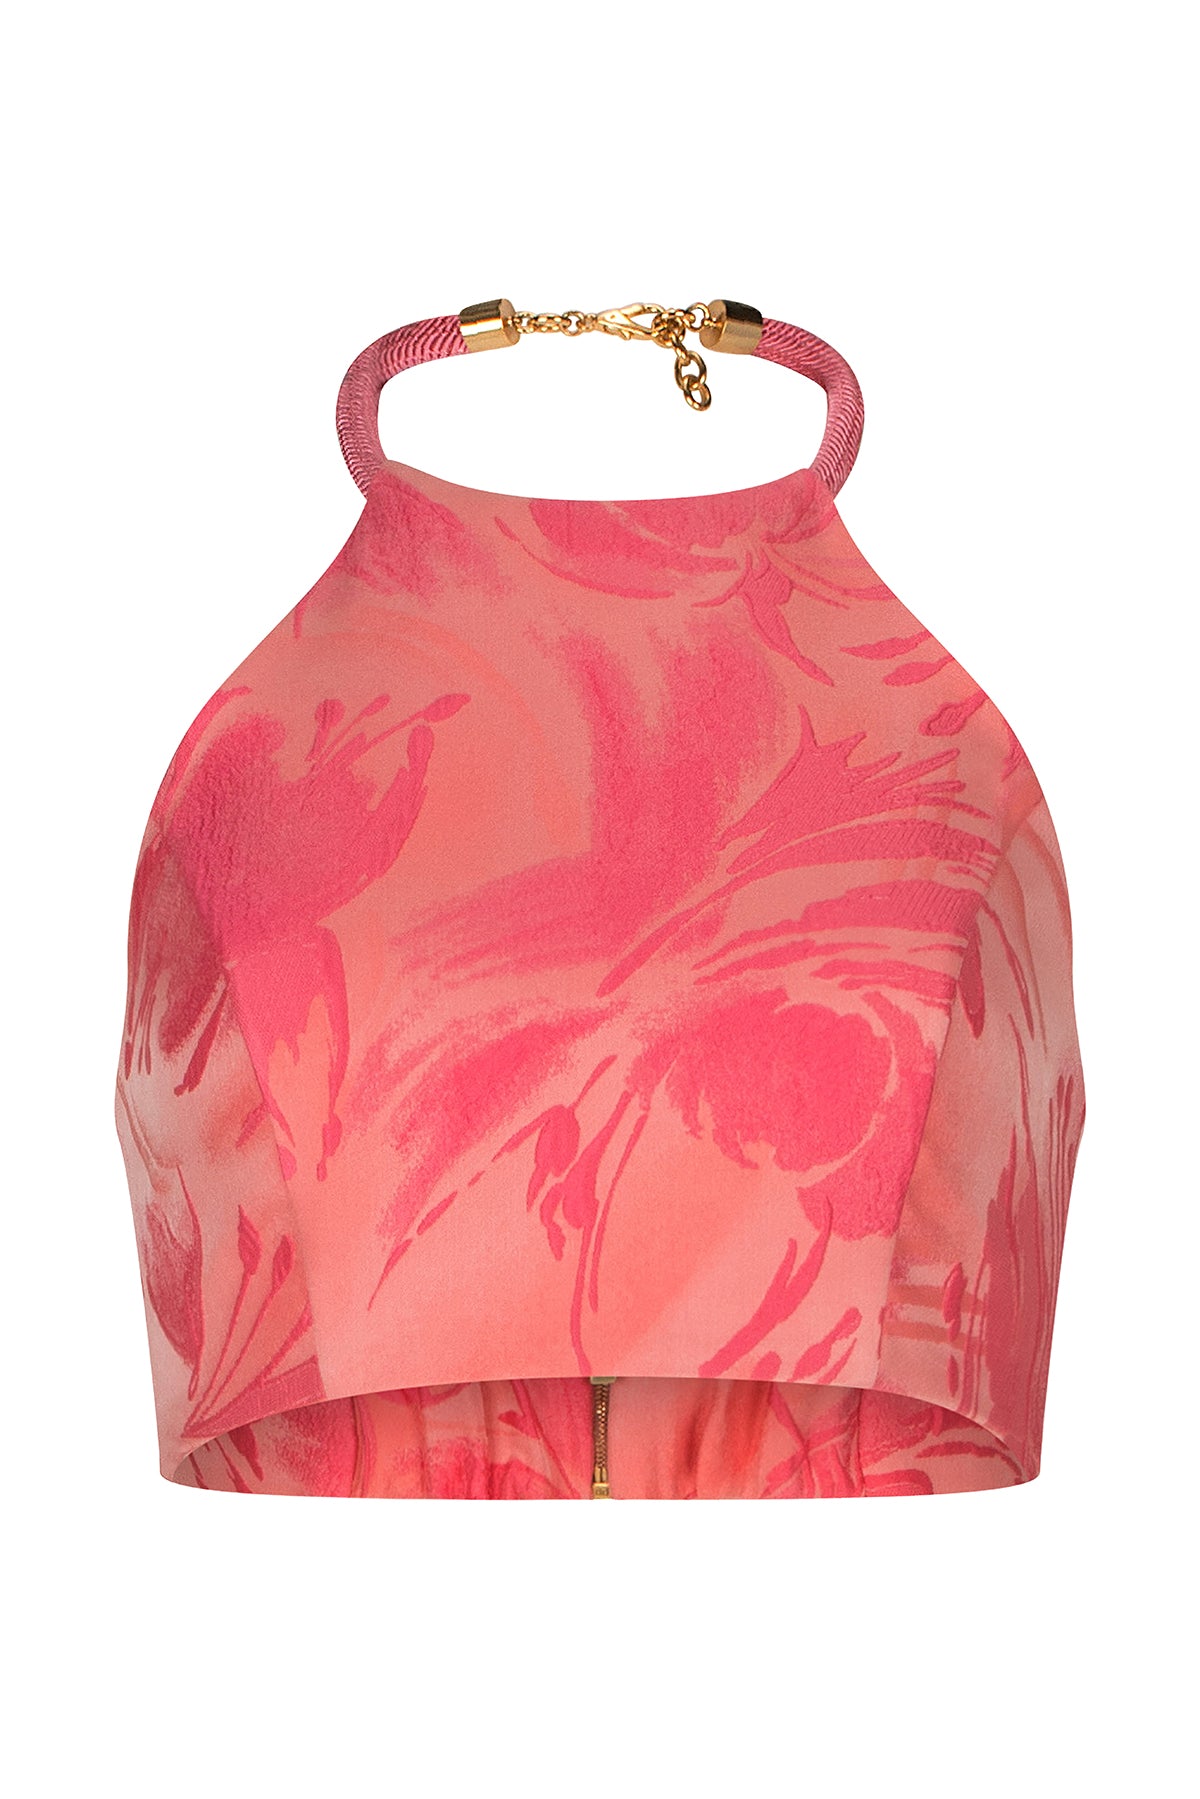 A Zita Top Fuchsia Pink with a gold chain and metallic jewelry.